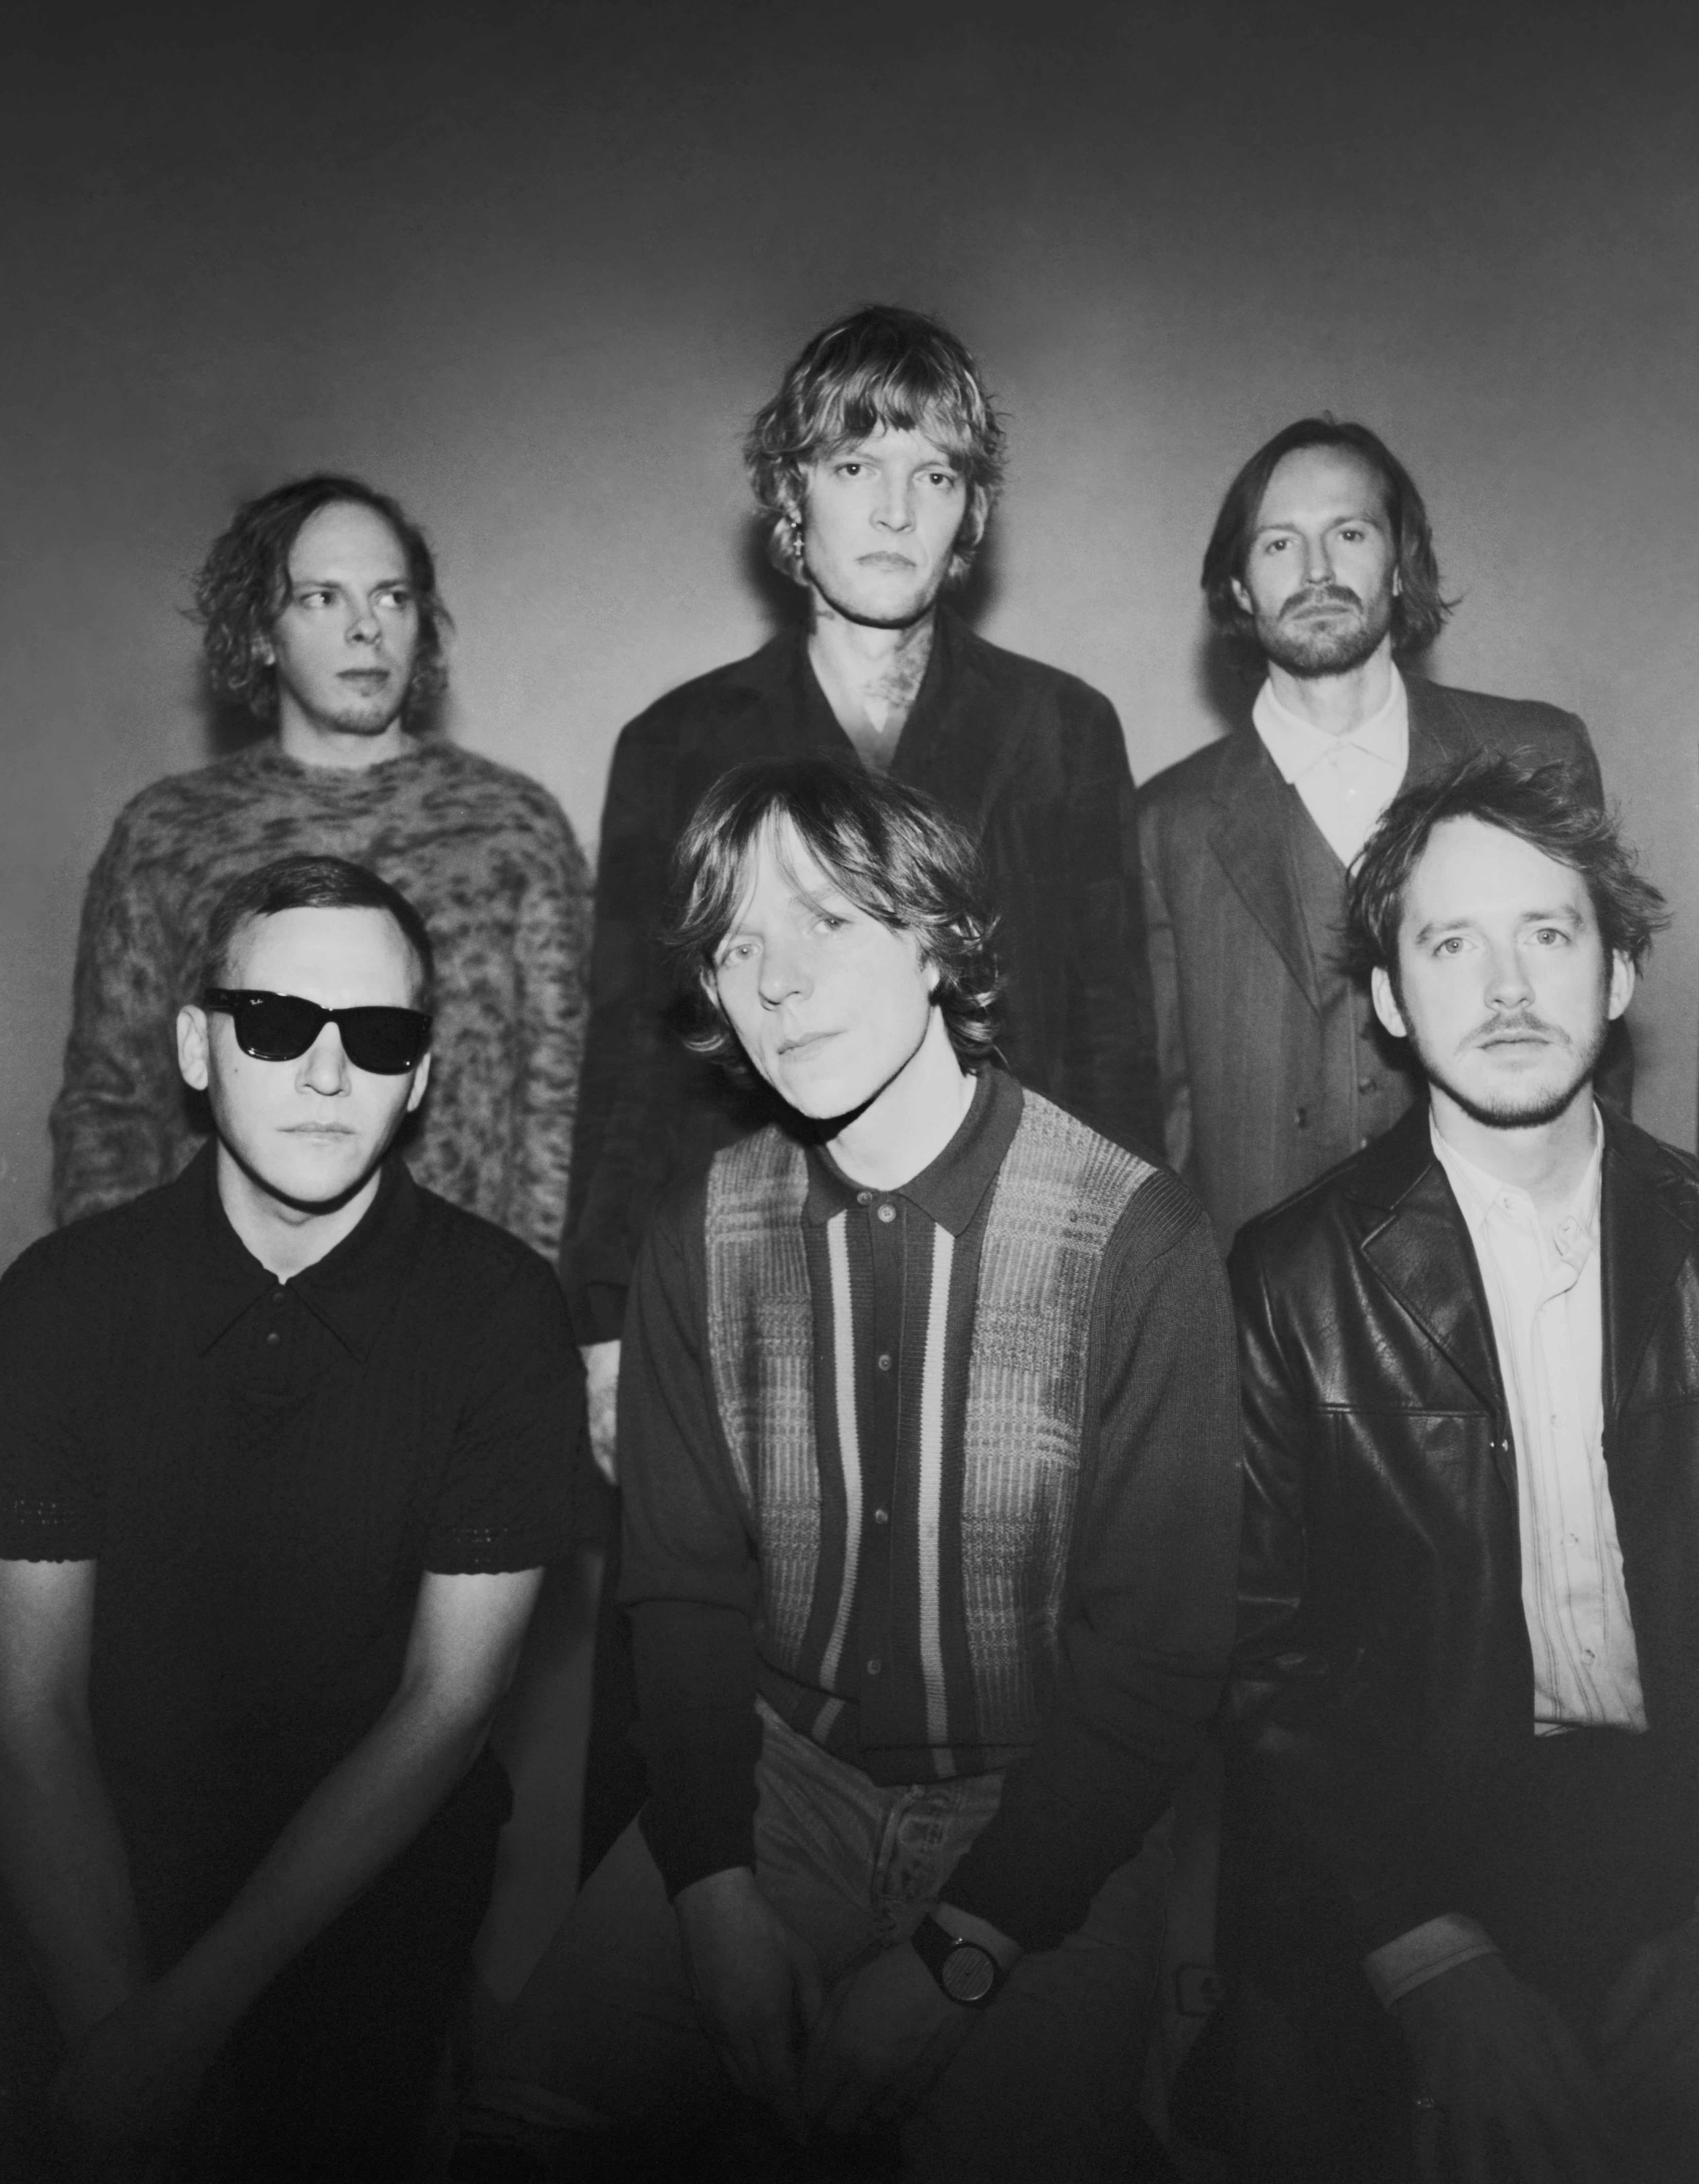 Cage The Elephant release new music video for “Trouble”